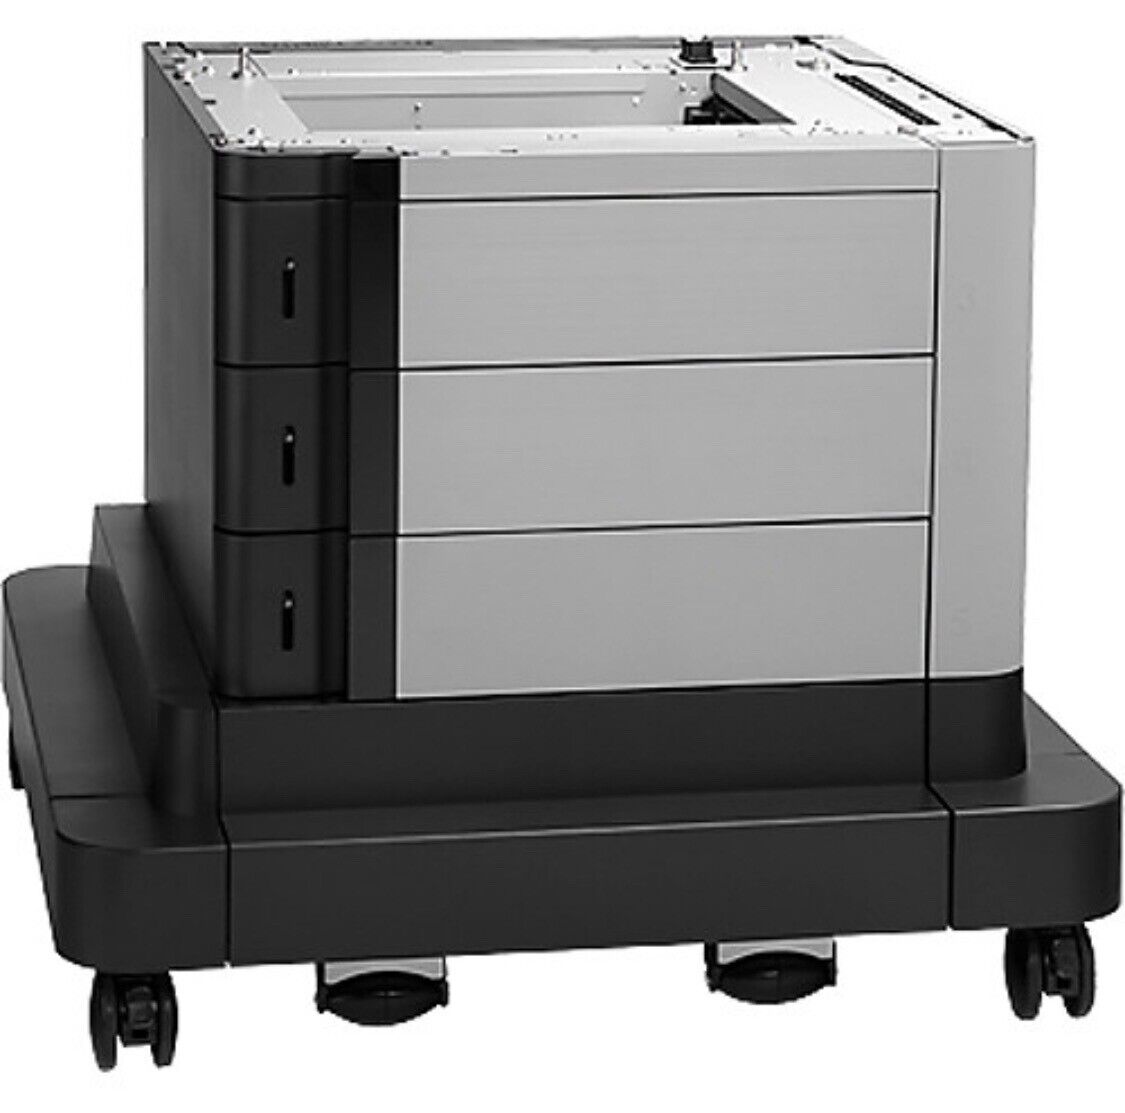 OEM CZ263A-R 2x500/1x1500-Sheet Paper Feeder & Stand for HP LaserJet M651, M680